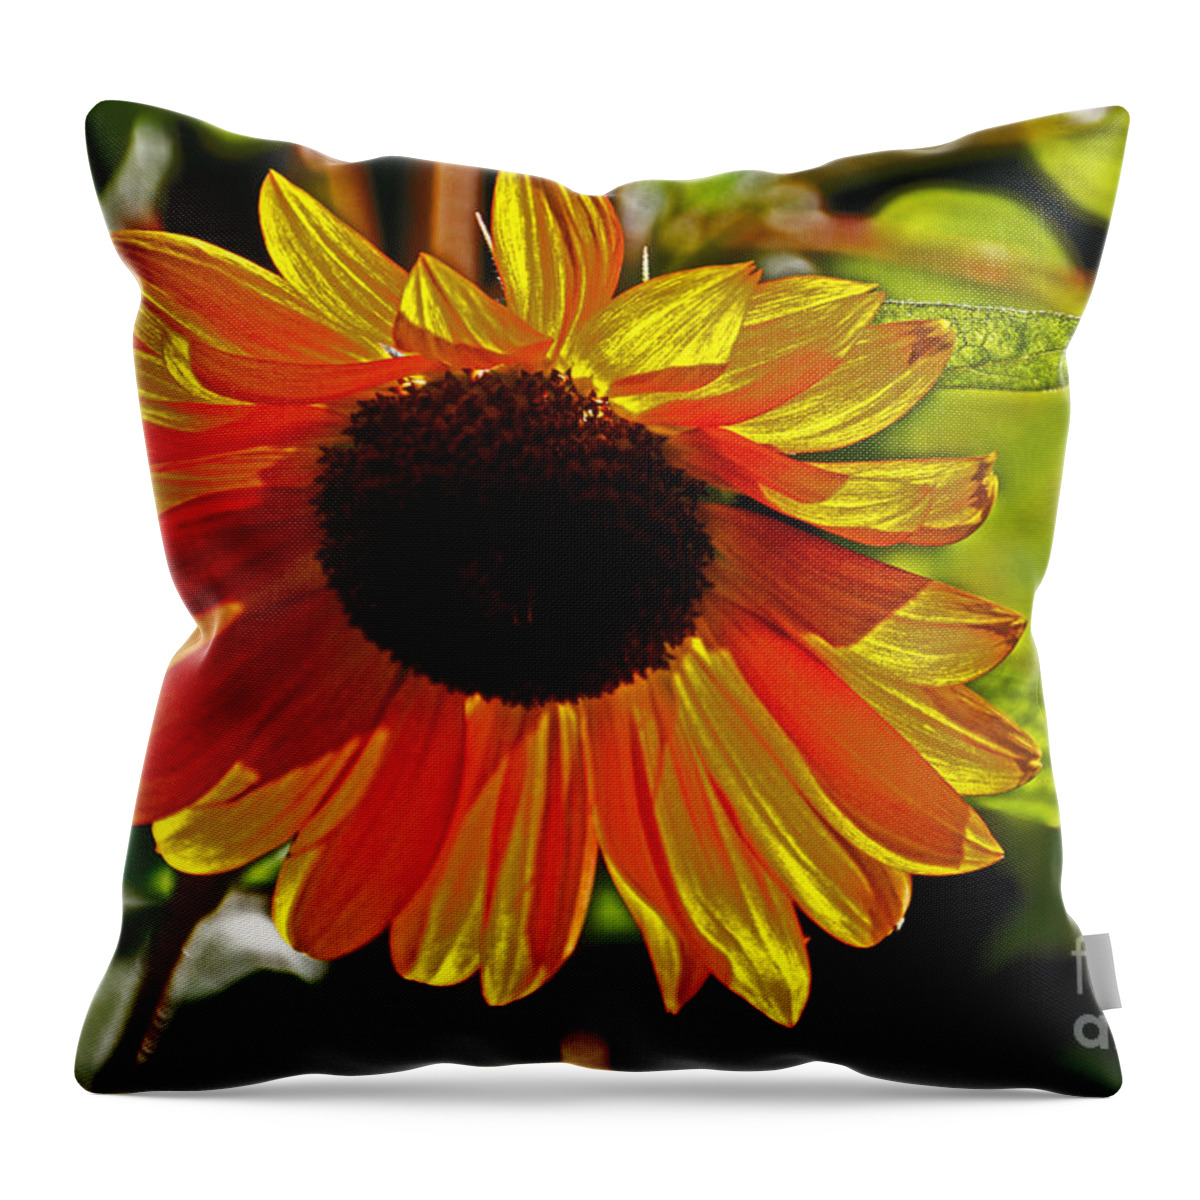  Throw Pillow featuring the photograph Sunflower 3 by David Frederick